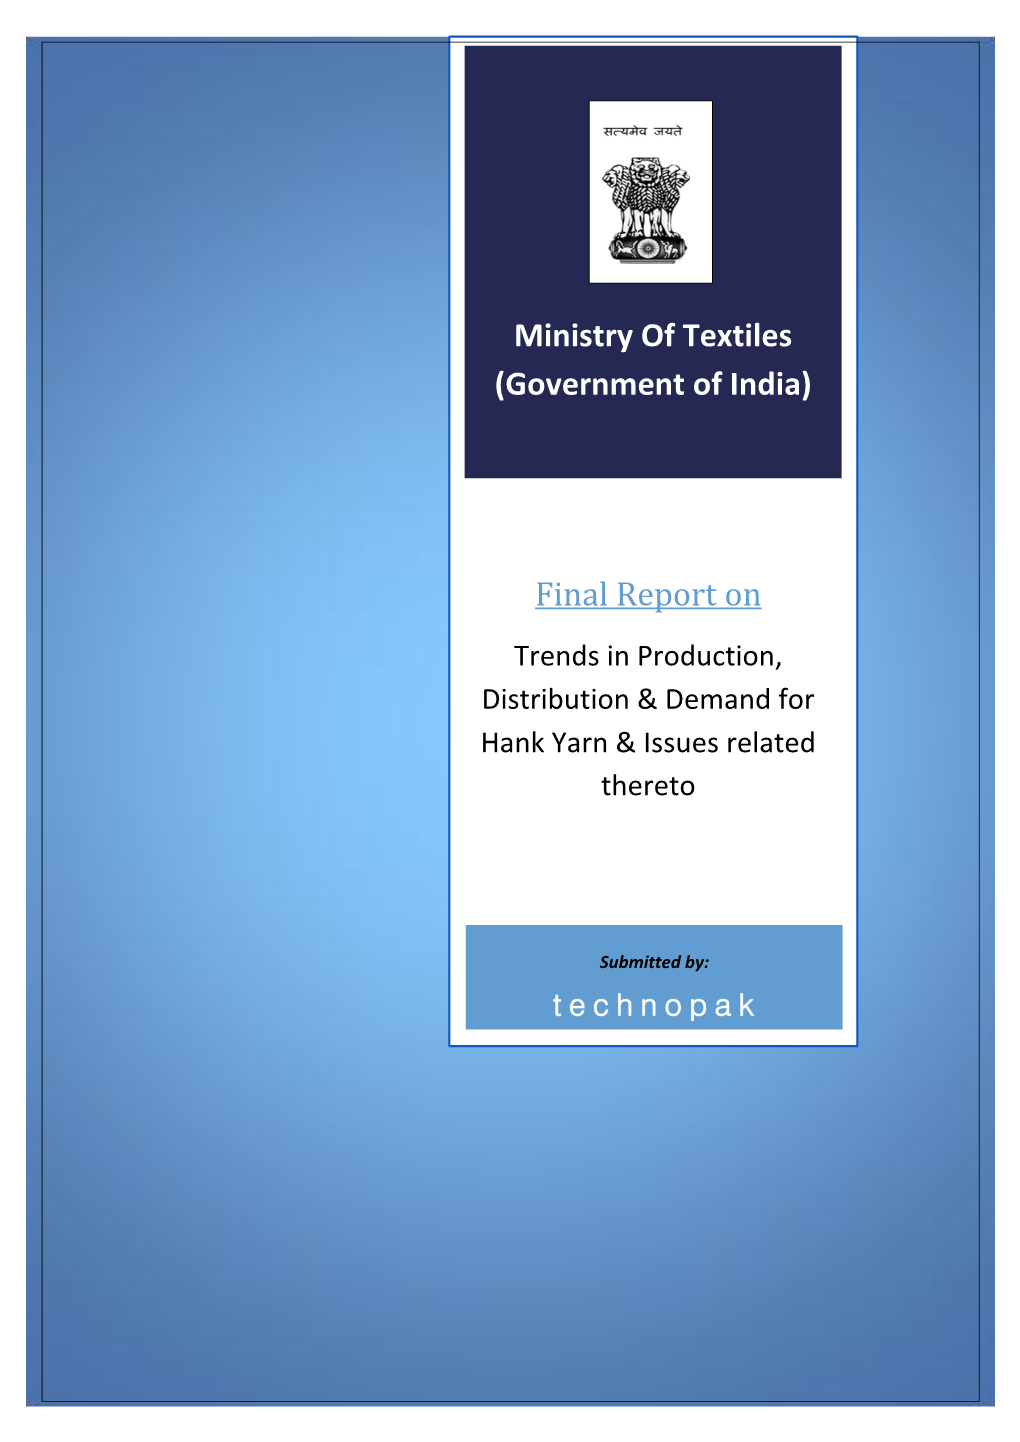 Ministry of Textiles (Government of India) Final Report On